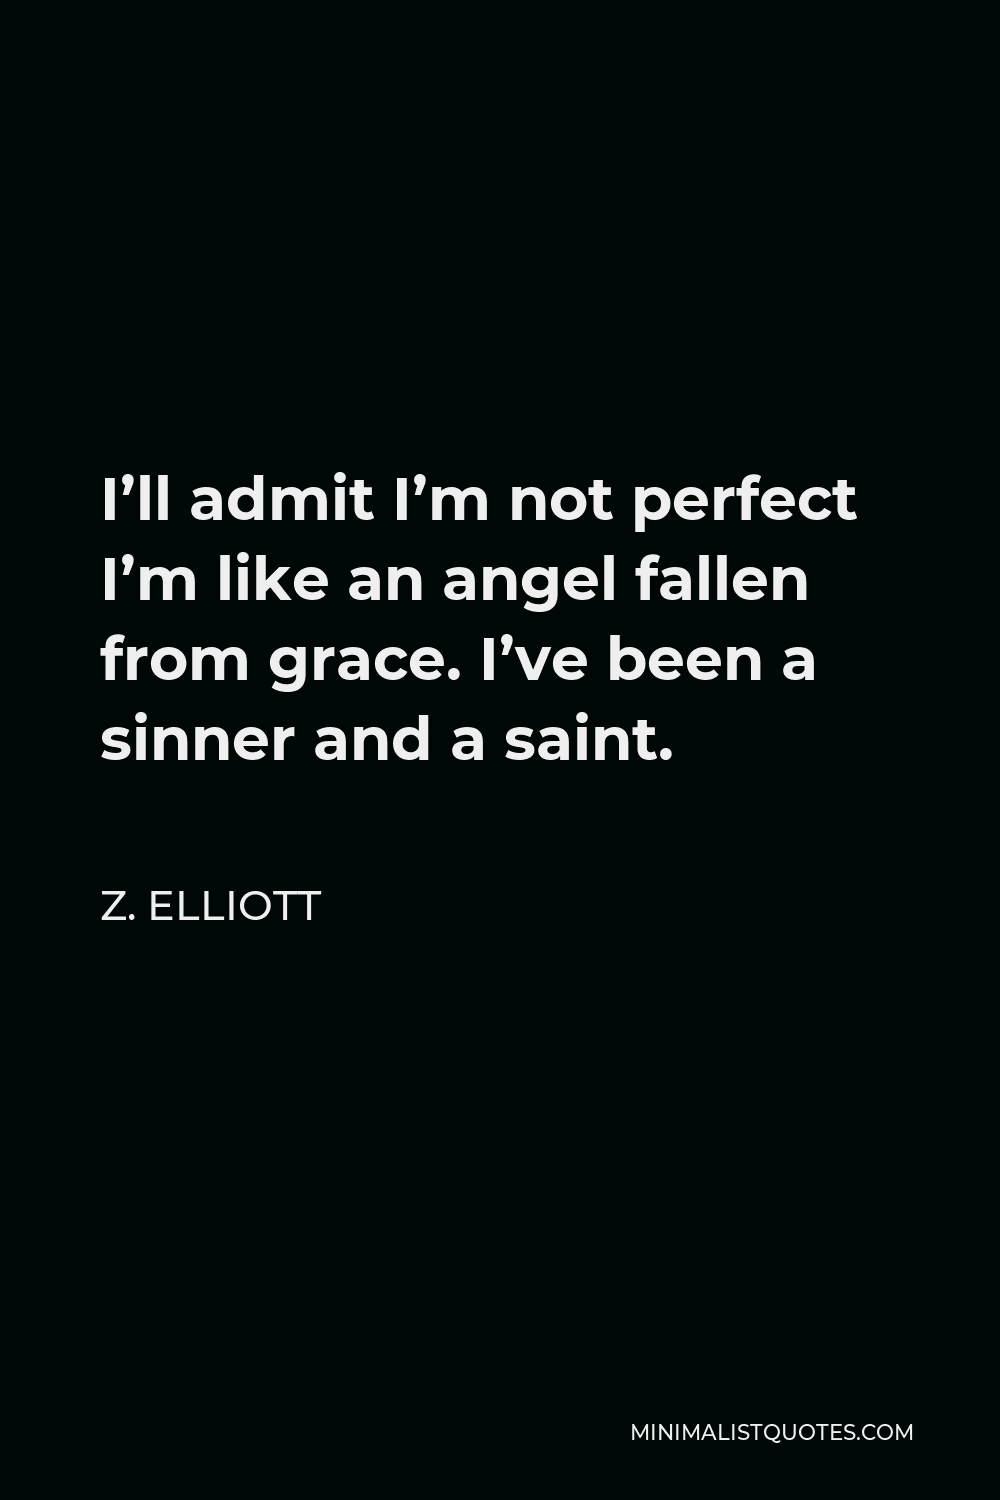 Z. Elliott Quote - I’ll admit I’m not perfect I’m like an angel fallen from grace. I’ve been a sinner and a saint.